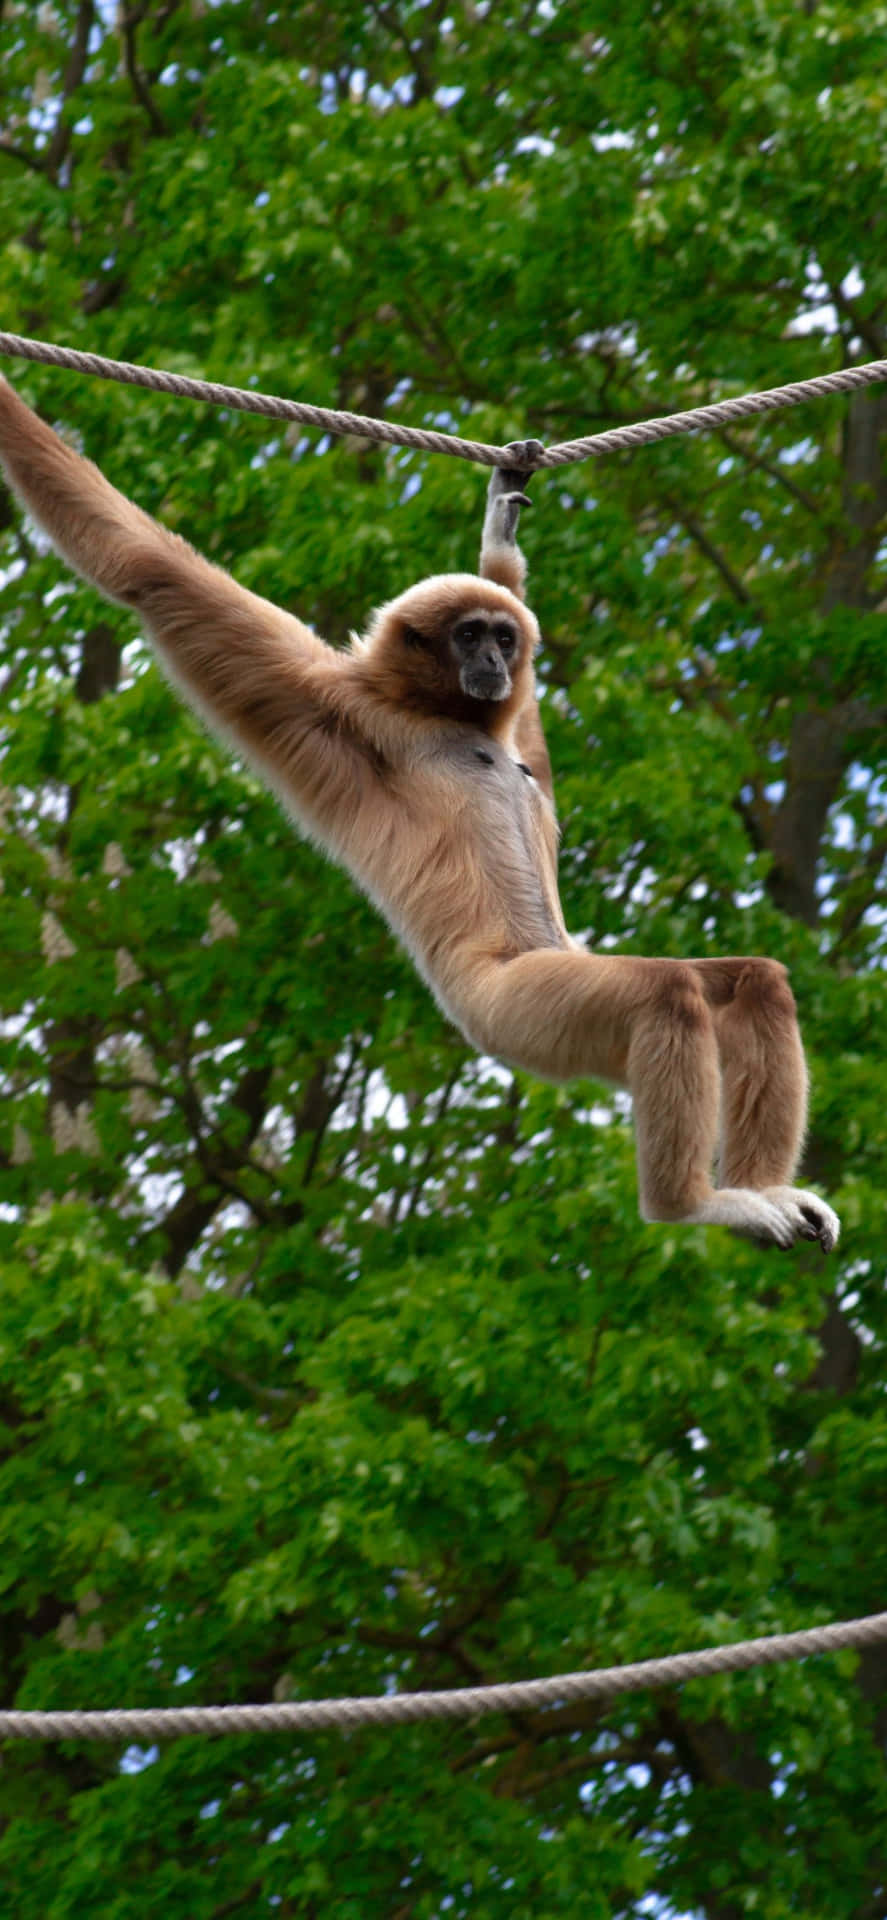 Get the new Iphone Xs Max Gibbon and join the future of tech.